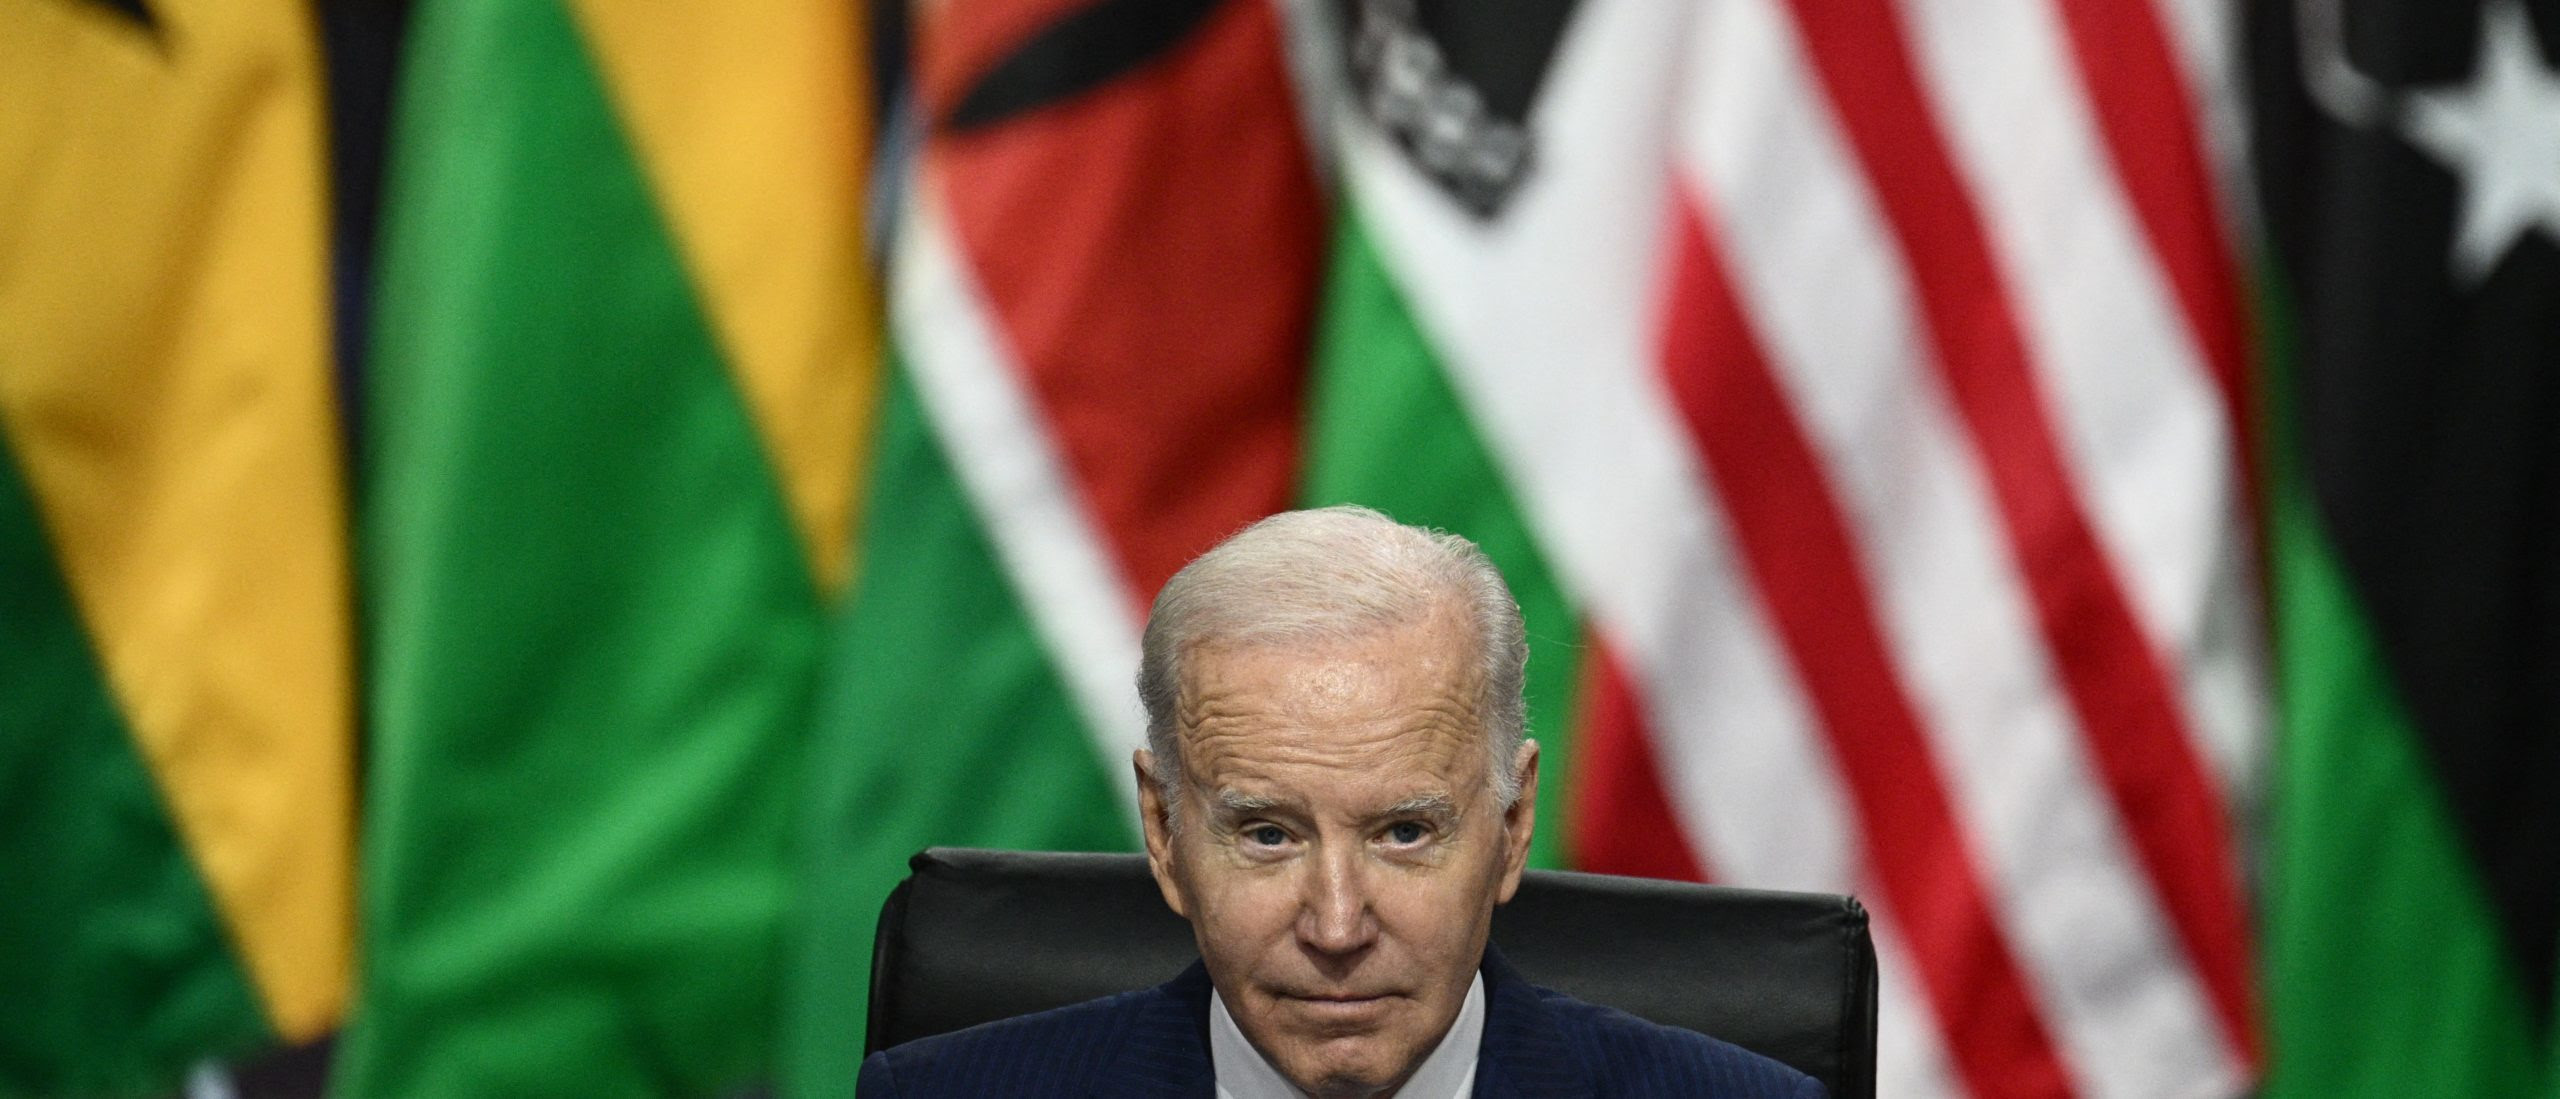 GORDON CHANG: China Insults A Submissive Biden Desperate To Talk To Xi